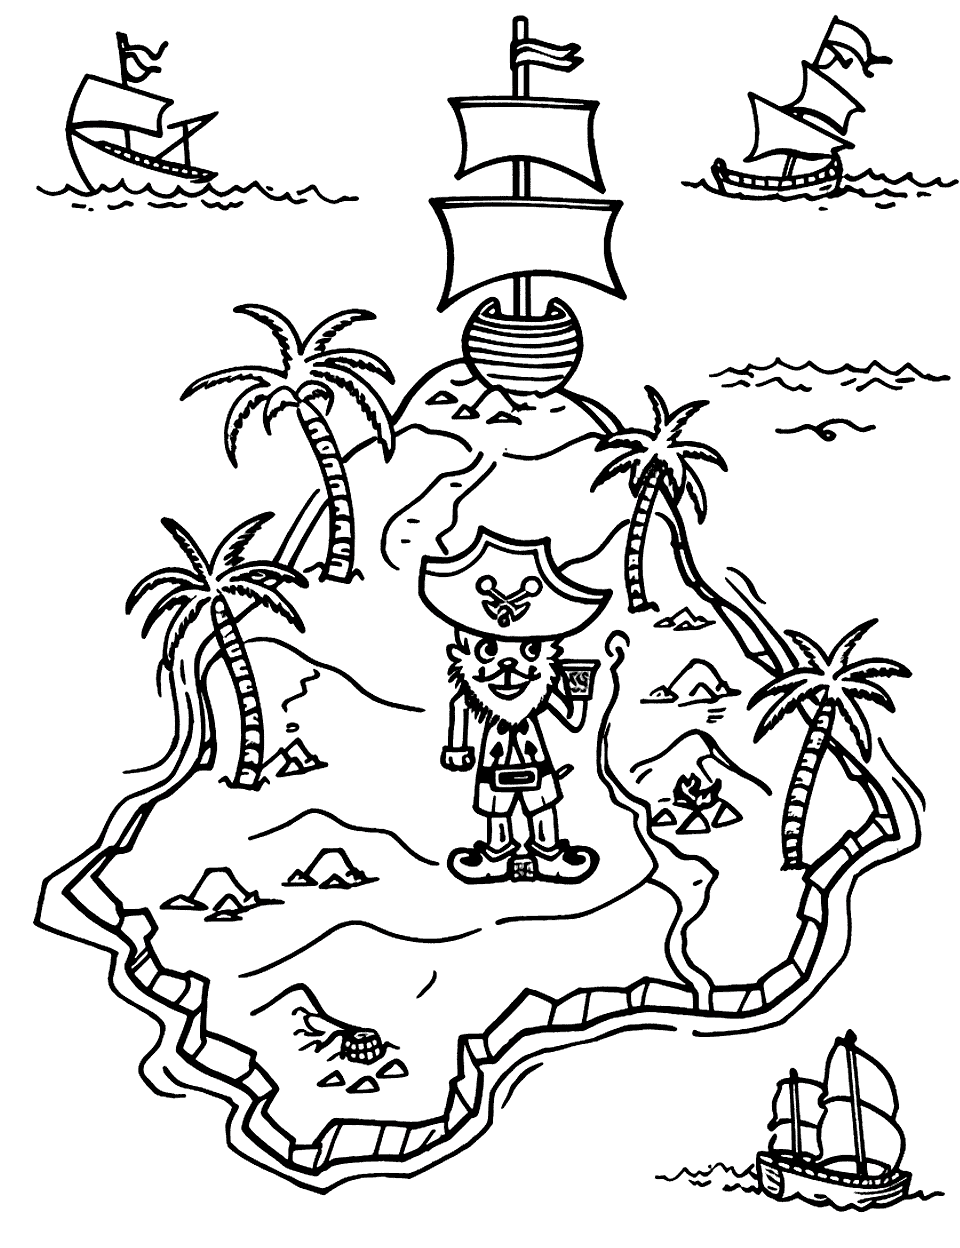 Treasure Map Adventure Pirate Coloring Page - A simple map of buried treasure on an island.